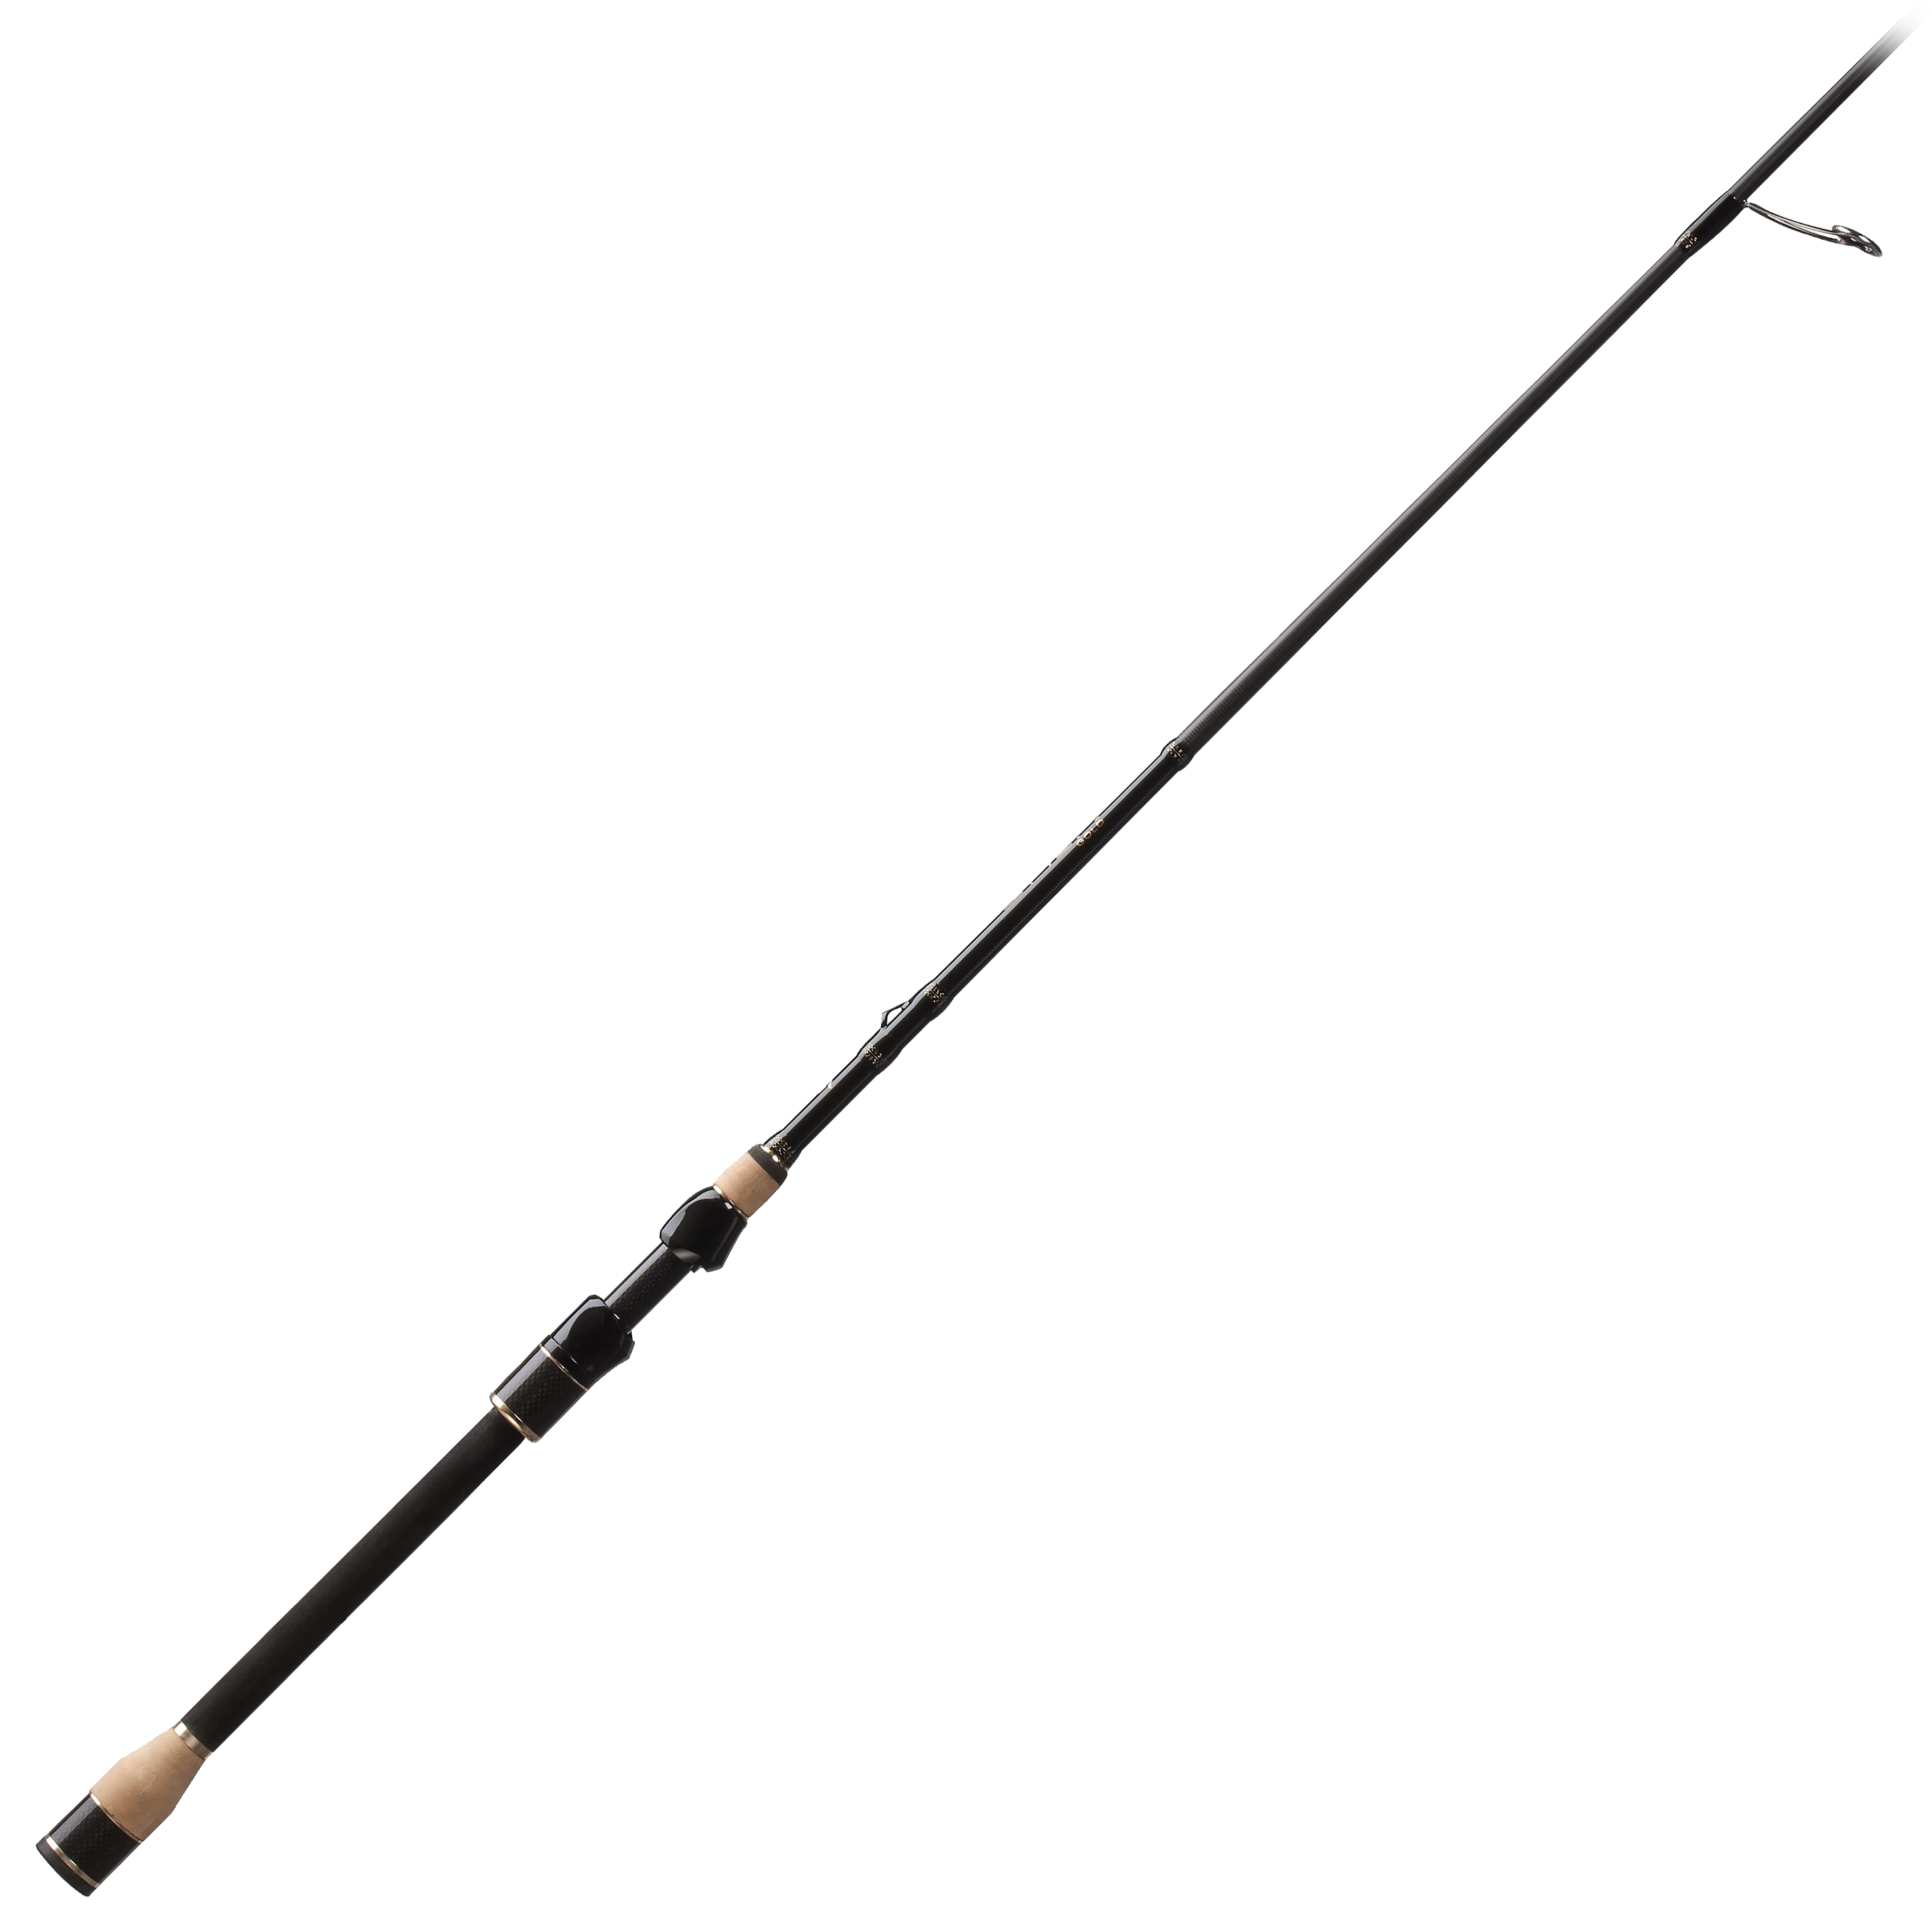  13 FISHING - Omen Gold - 6'6 M Spinning Rod - OGLDS66M :  Sports & Outdoors